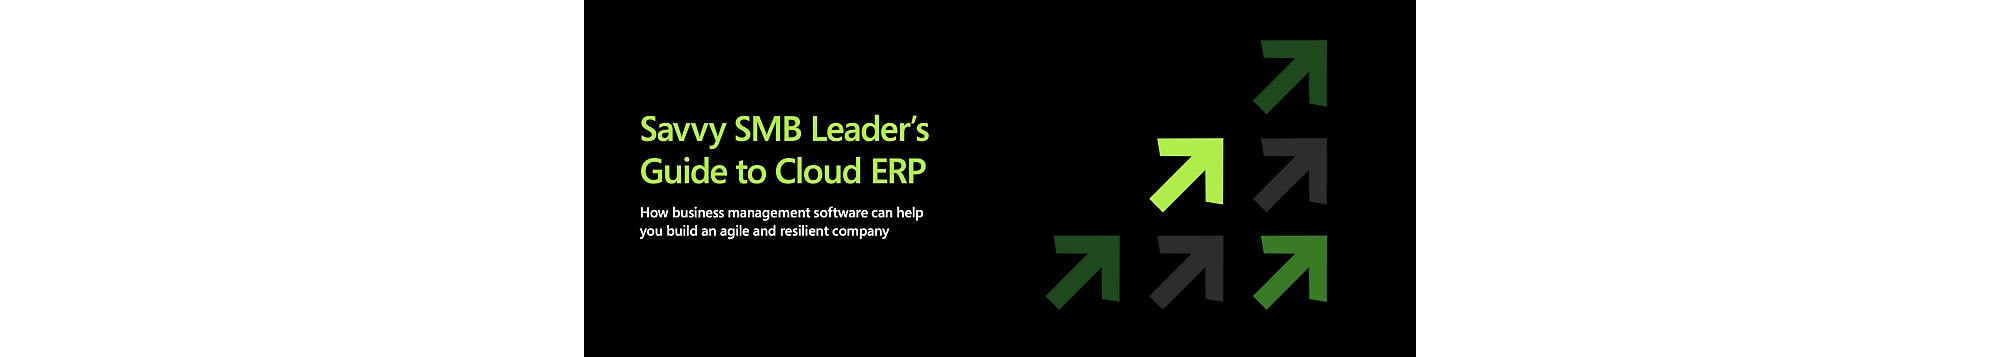 Savvy smb leader's guide to cloud erp.